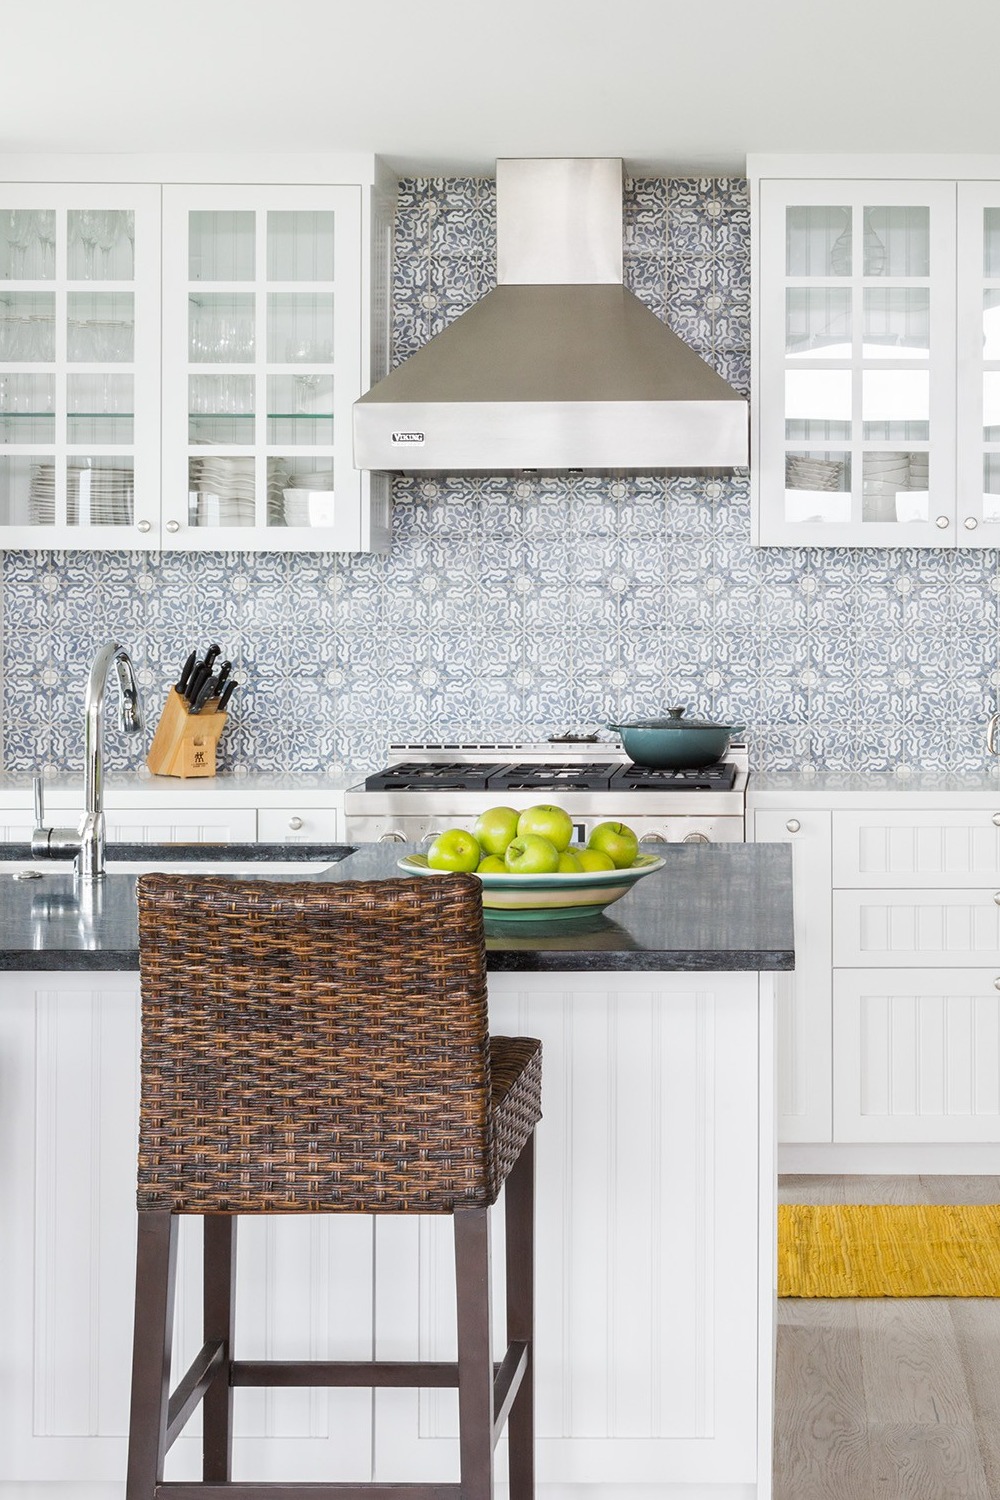 White Subway Tile Marble Countertop Flat Panel Cabinets White Kitchen Shaker Cabinetry Light Blue